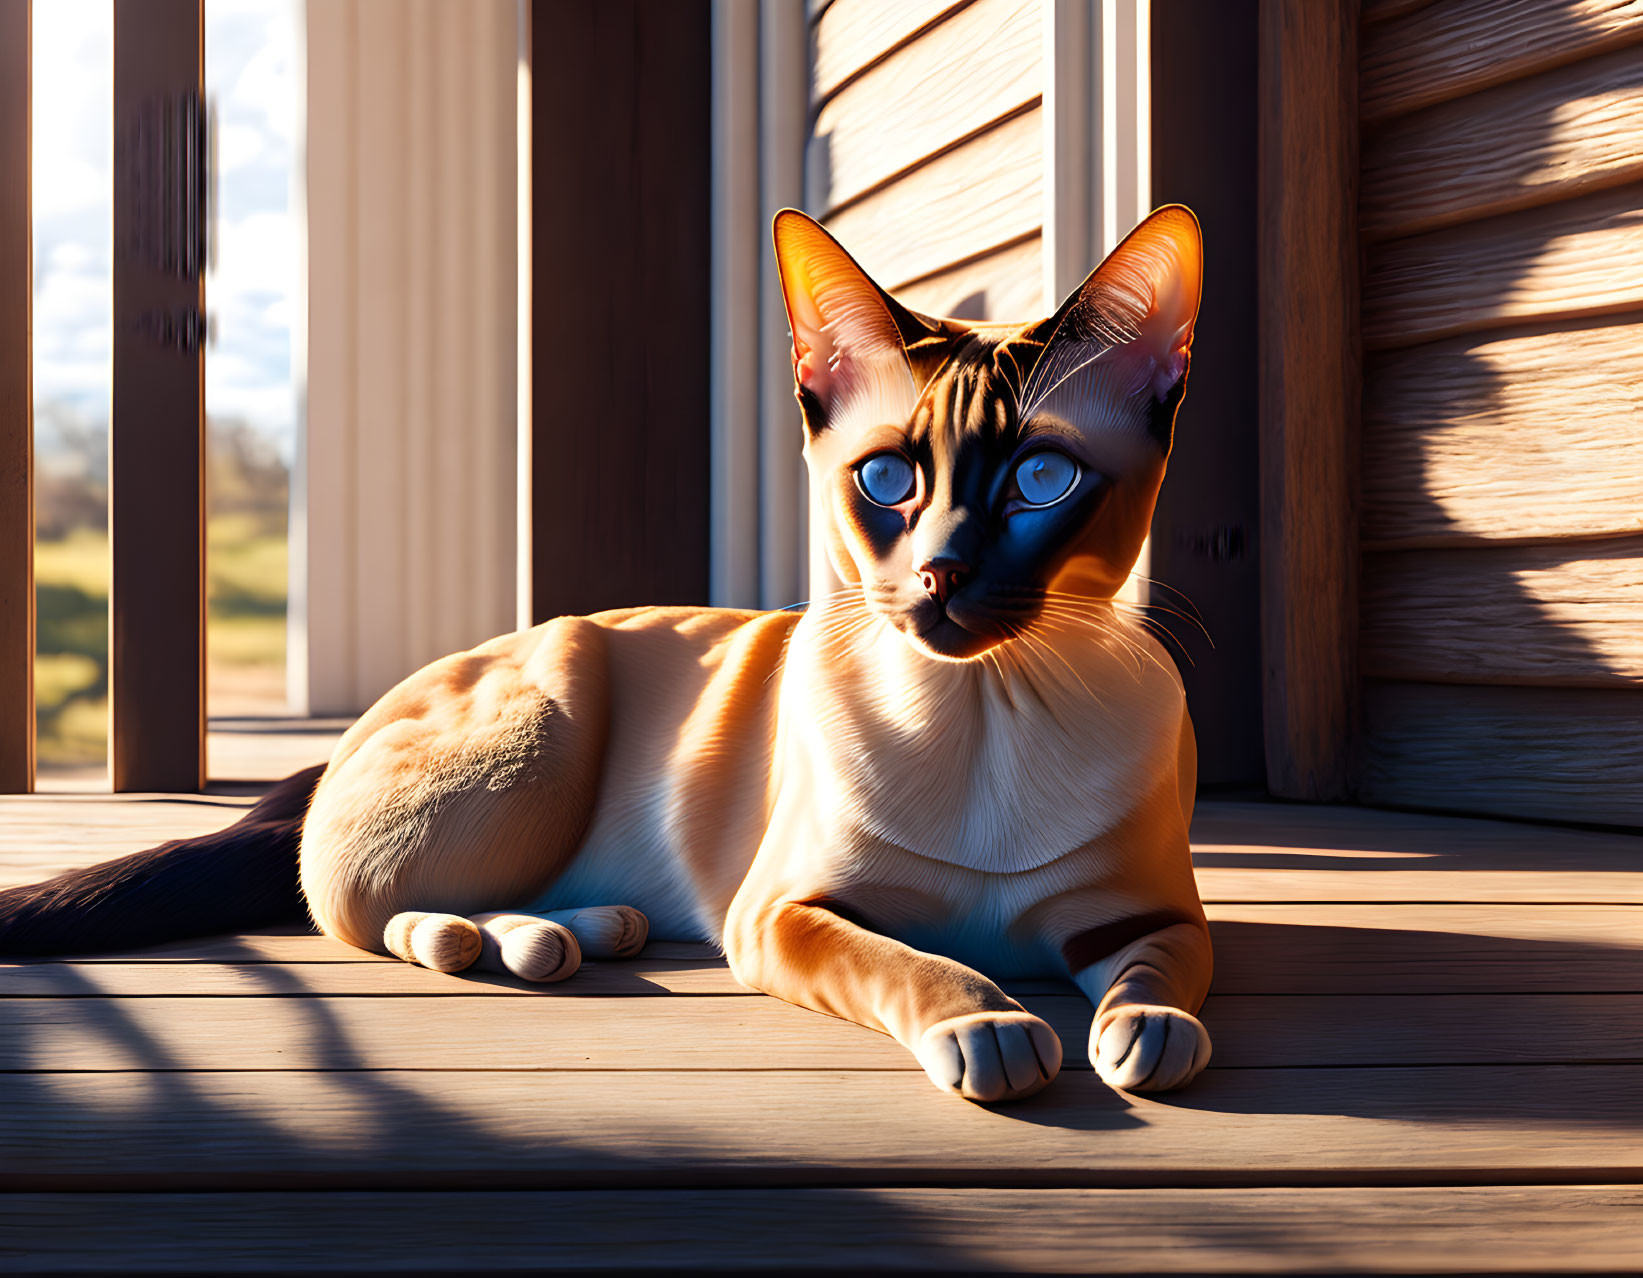  Siamese Сat Lying On A Sunlit Porch